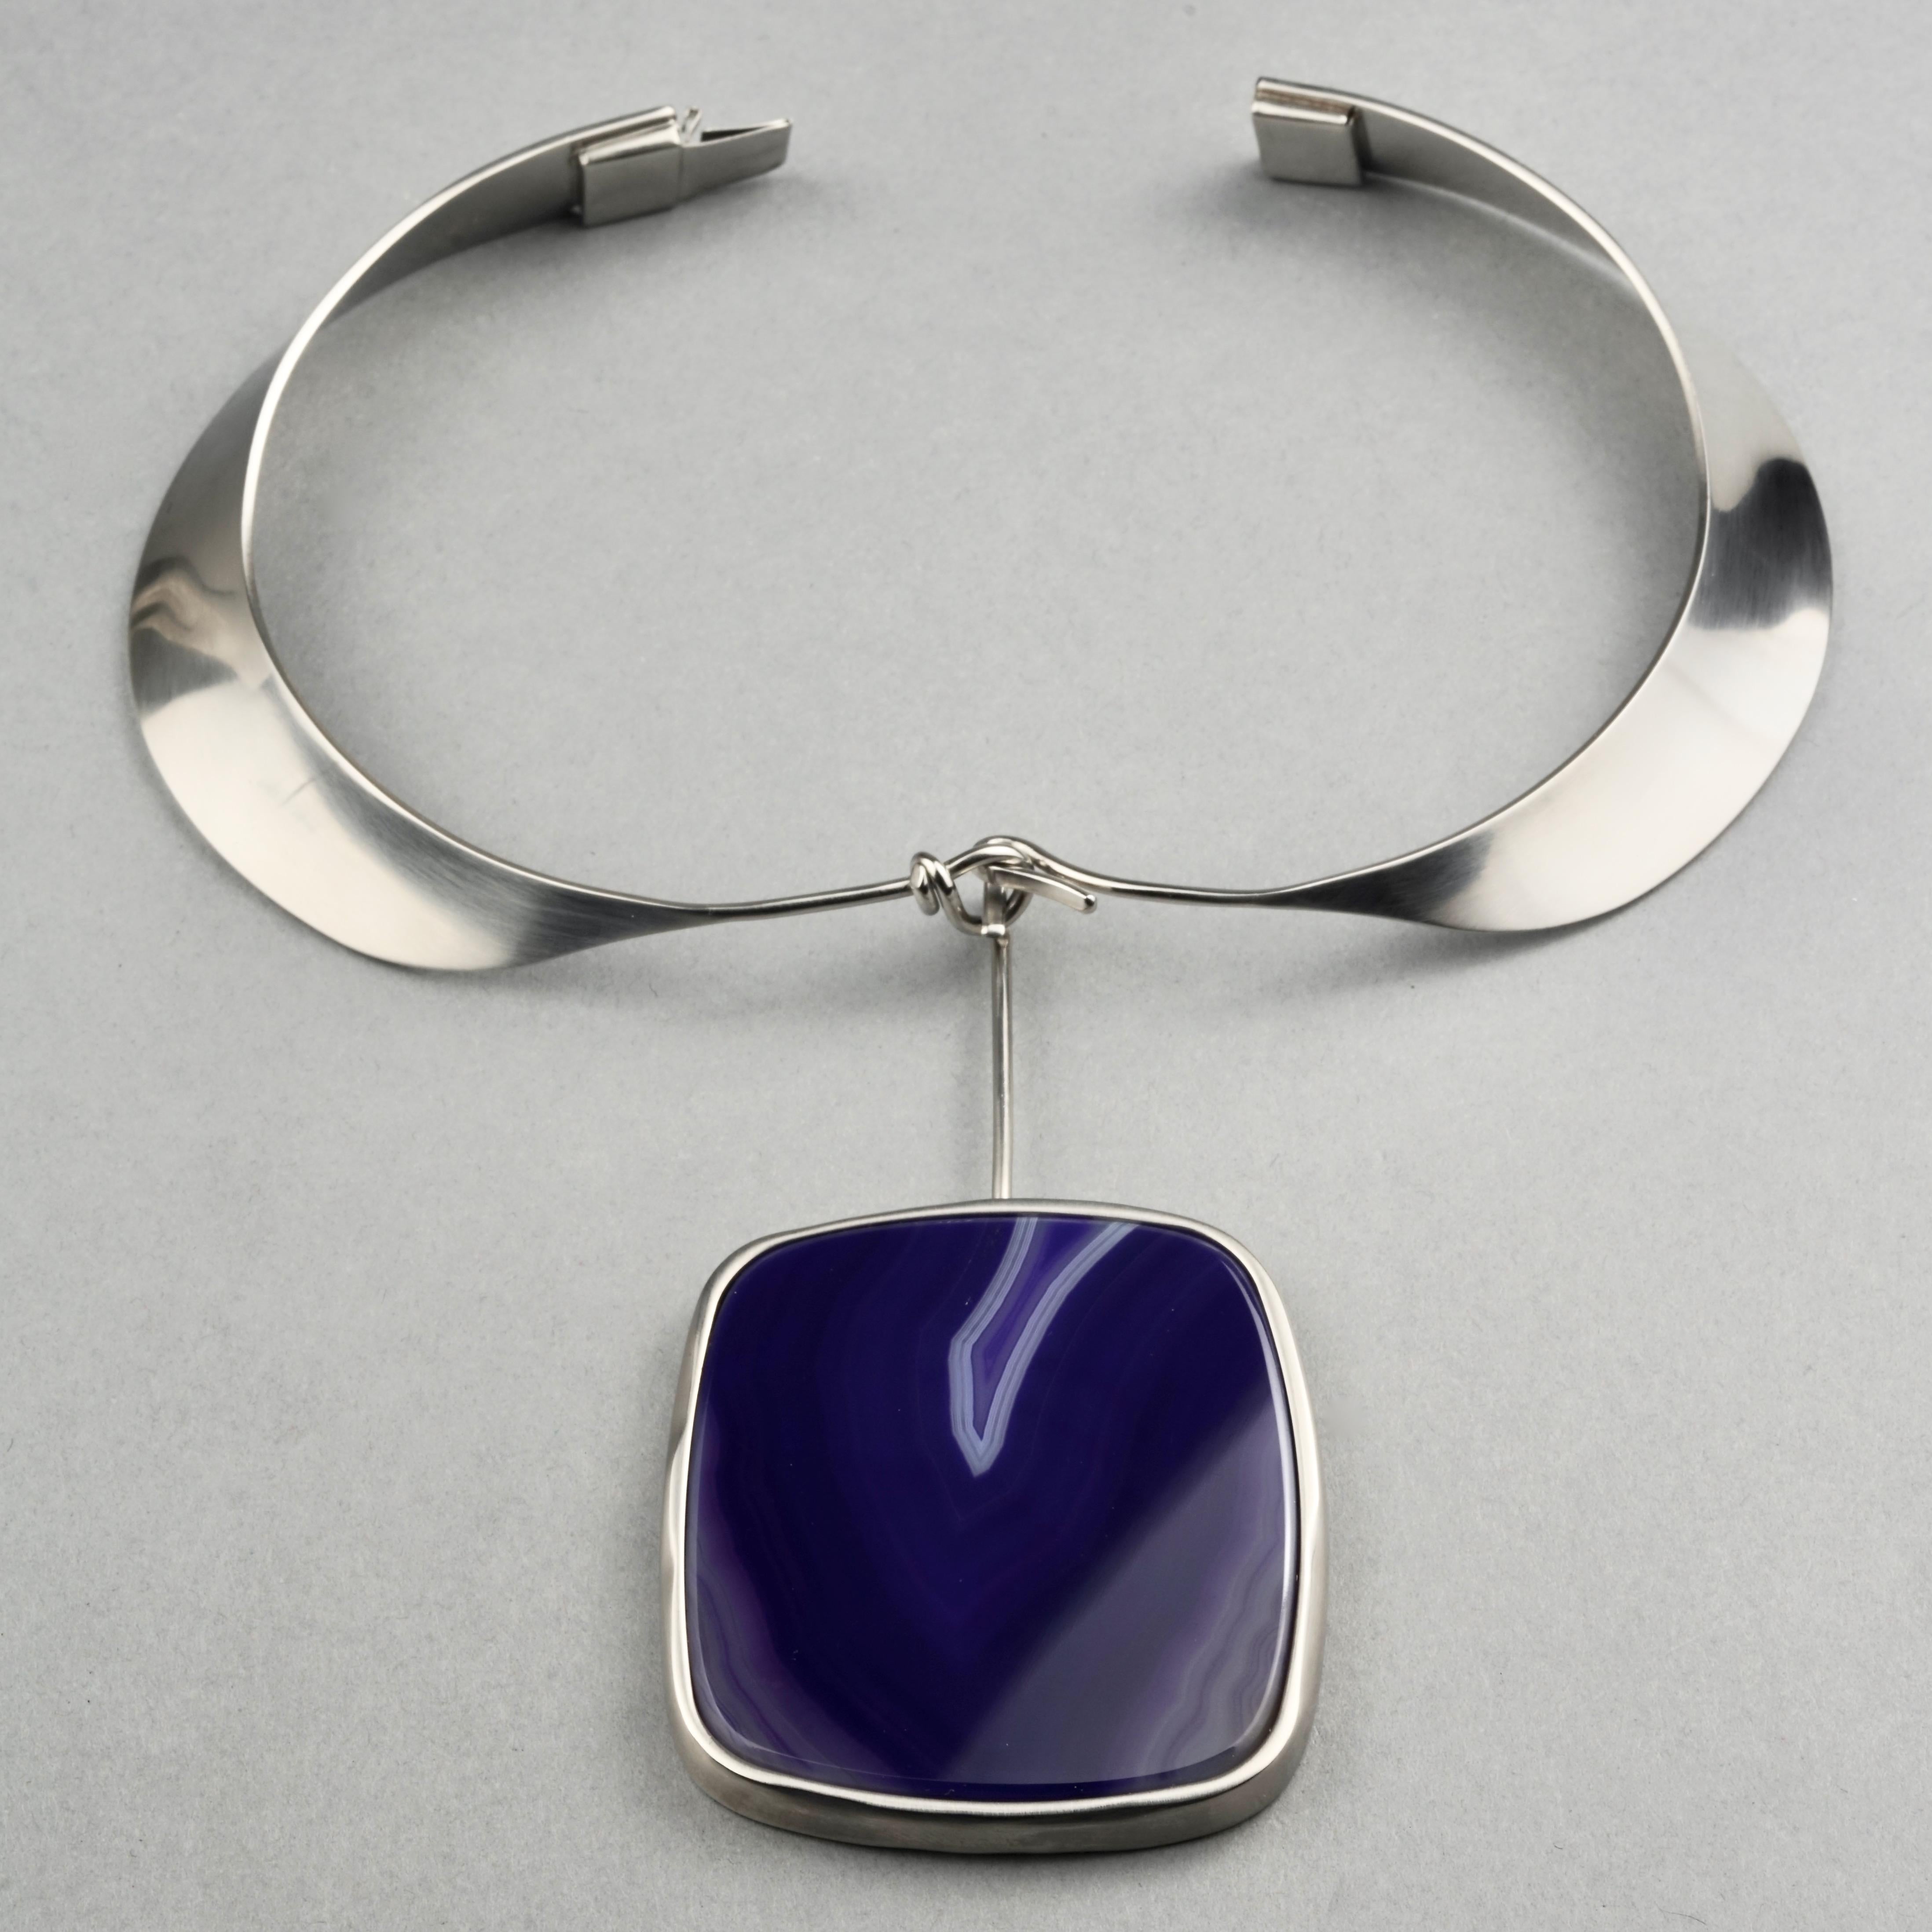 2012 CHANEL Dyed Agate Futuristic Choker Necklace In Good Condition For Sale In Kingersheim, Alsace